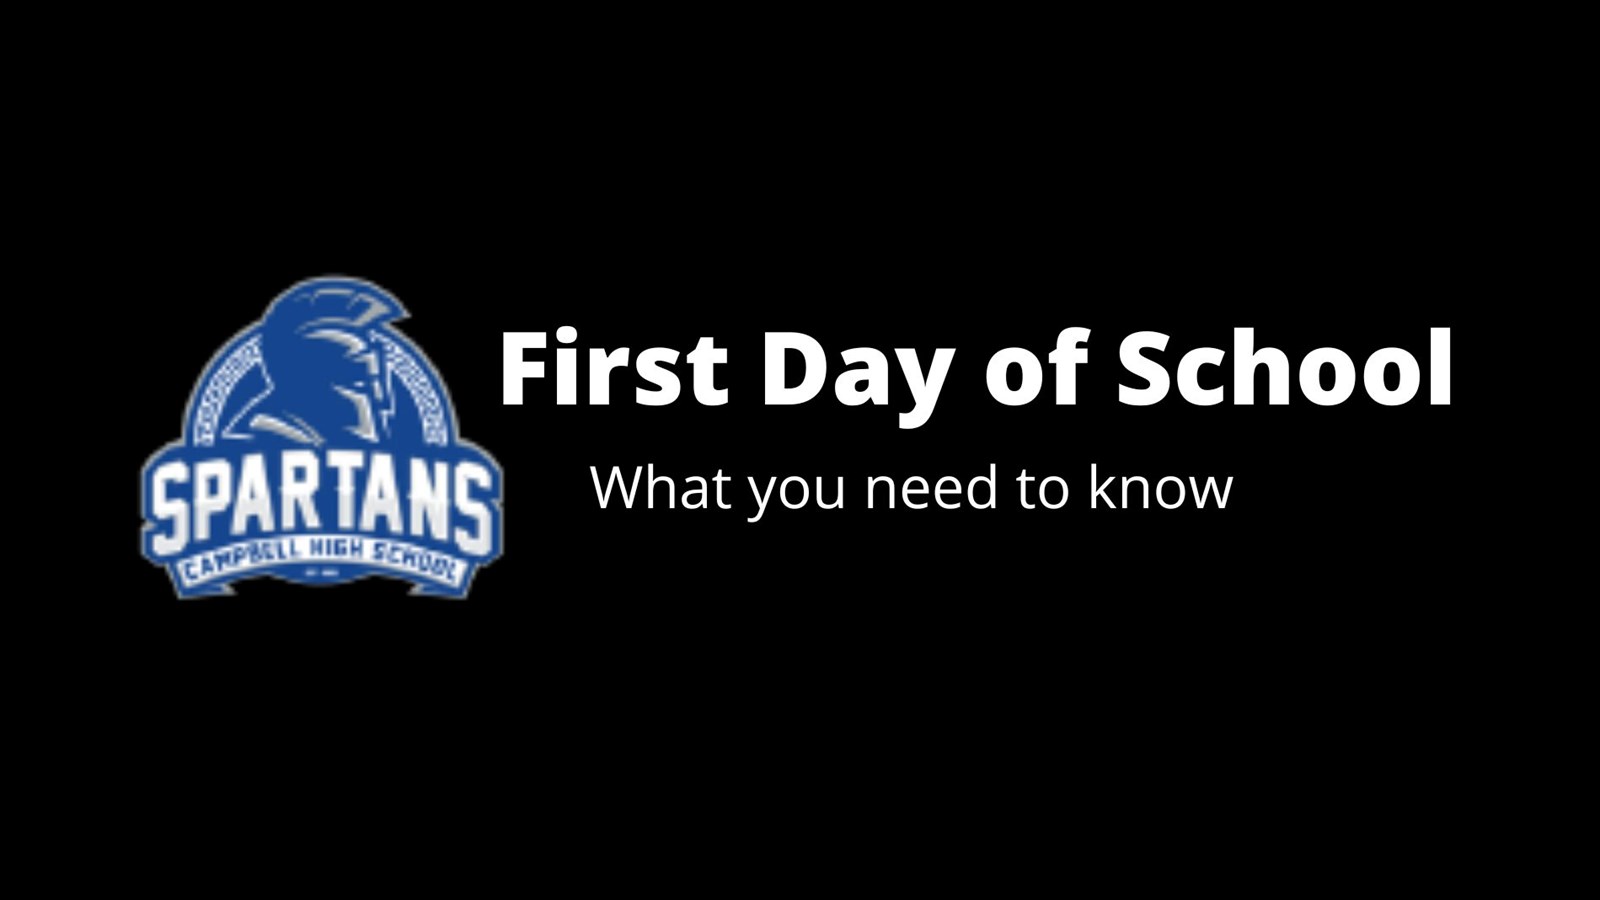 First Day of School Information